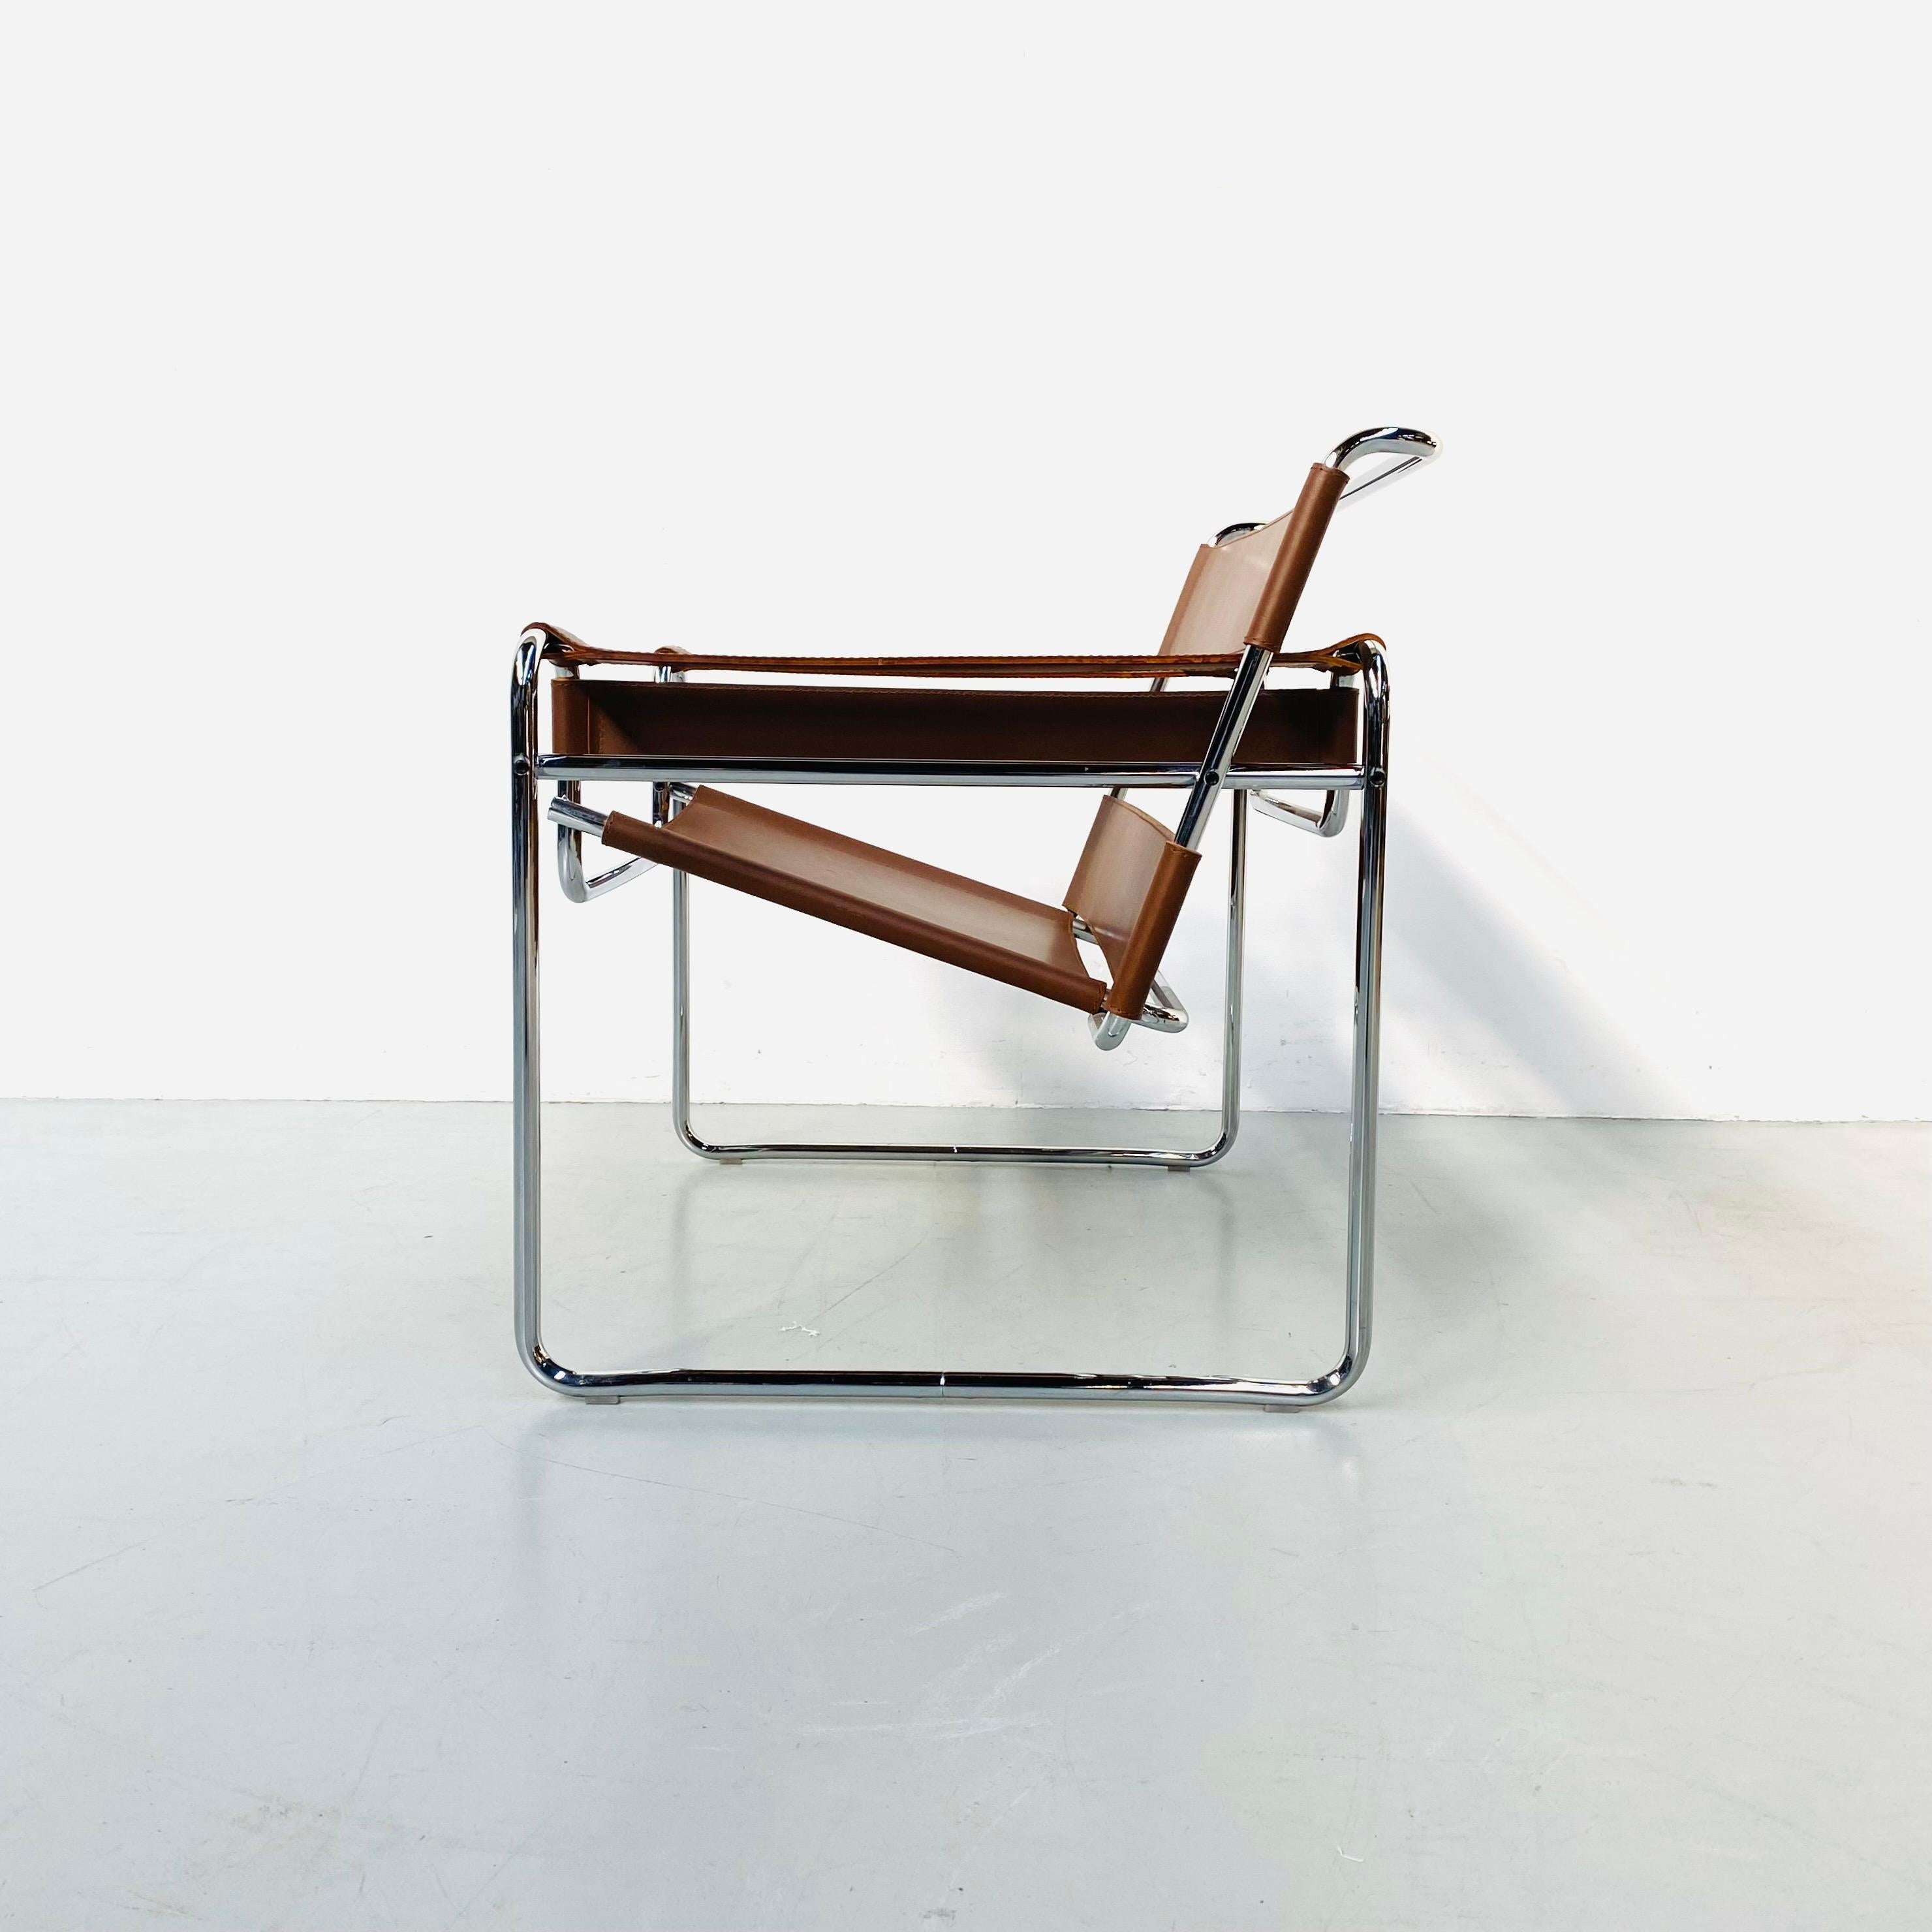 Steel Cognac Leather B3 Wassily Chair by Marcel Breuer for Knoll Studio, 1980s